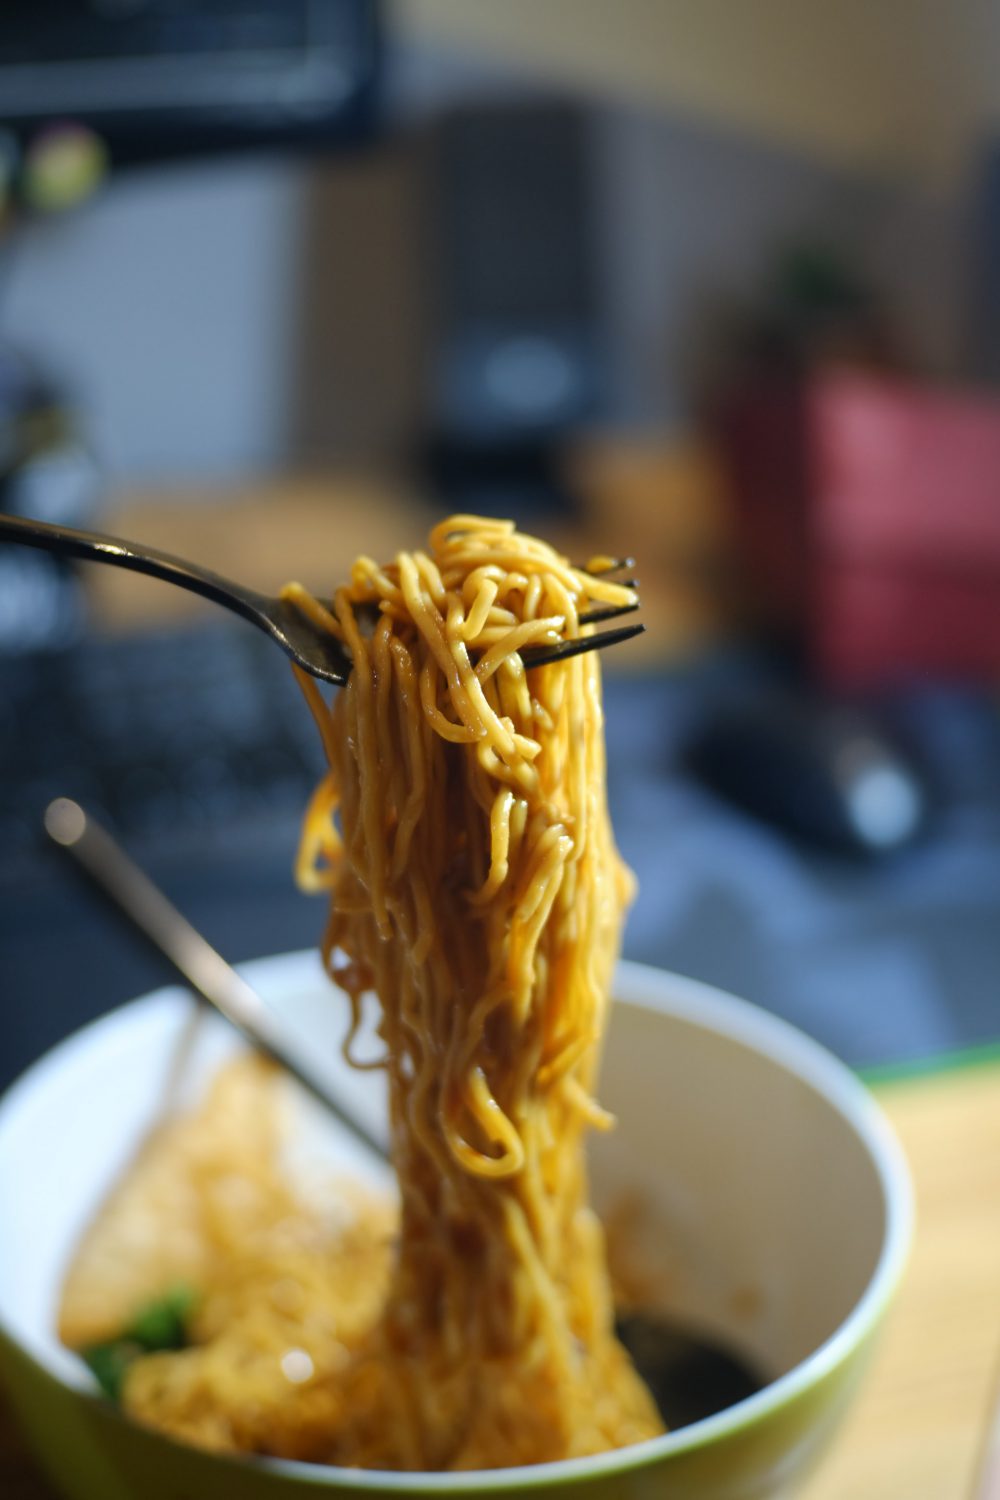 A bowl of noodles- a popular food eaten and loved by students